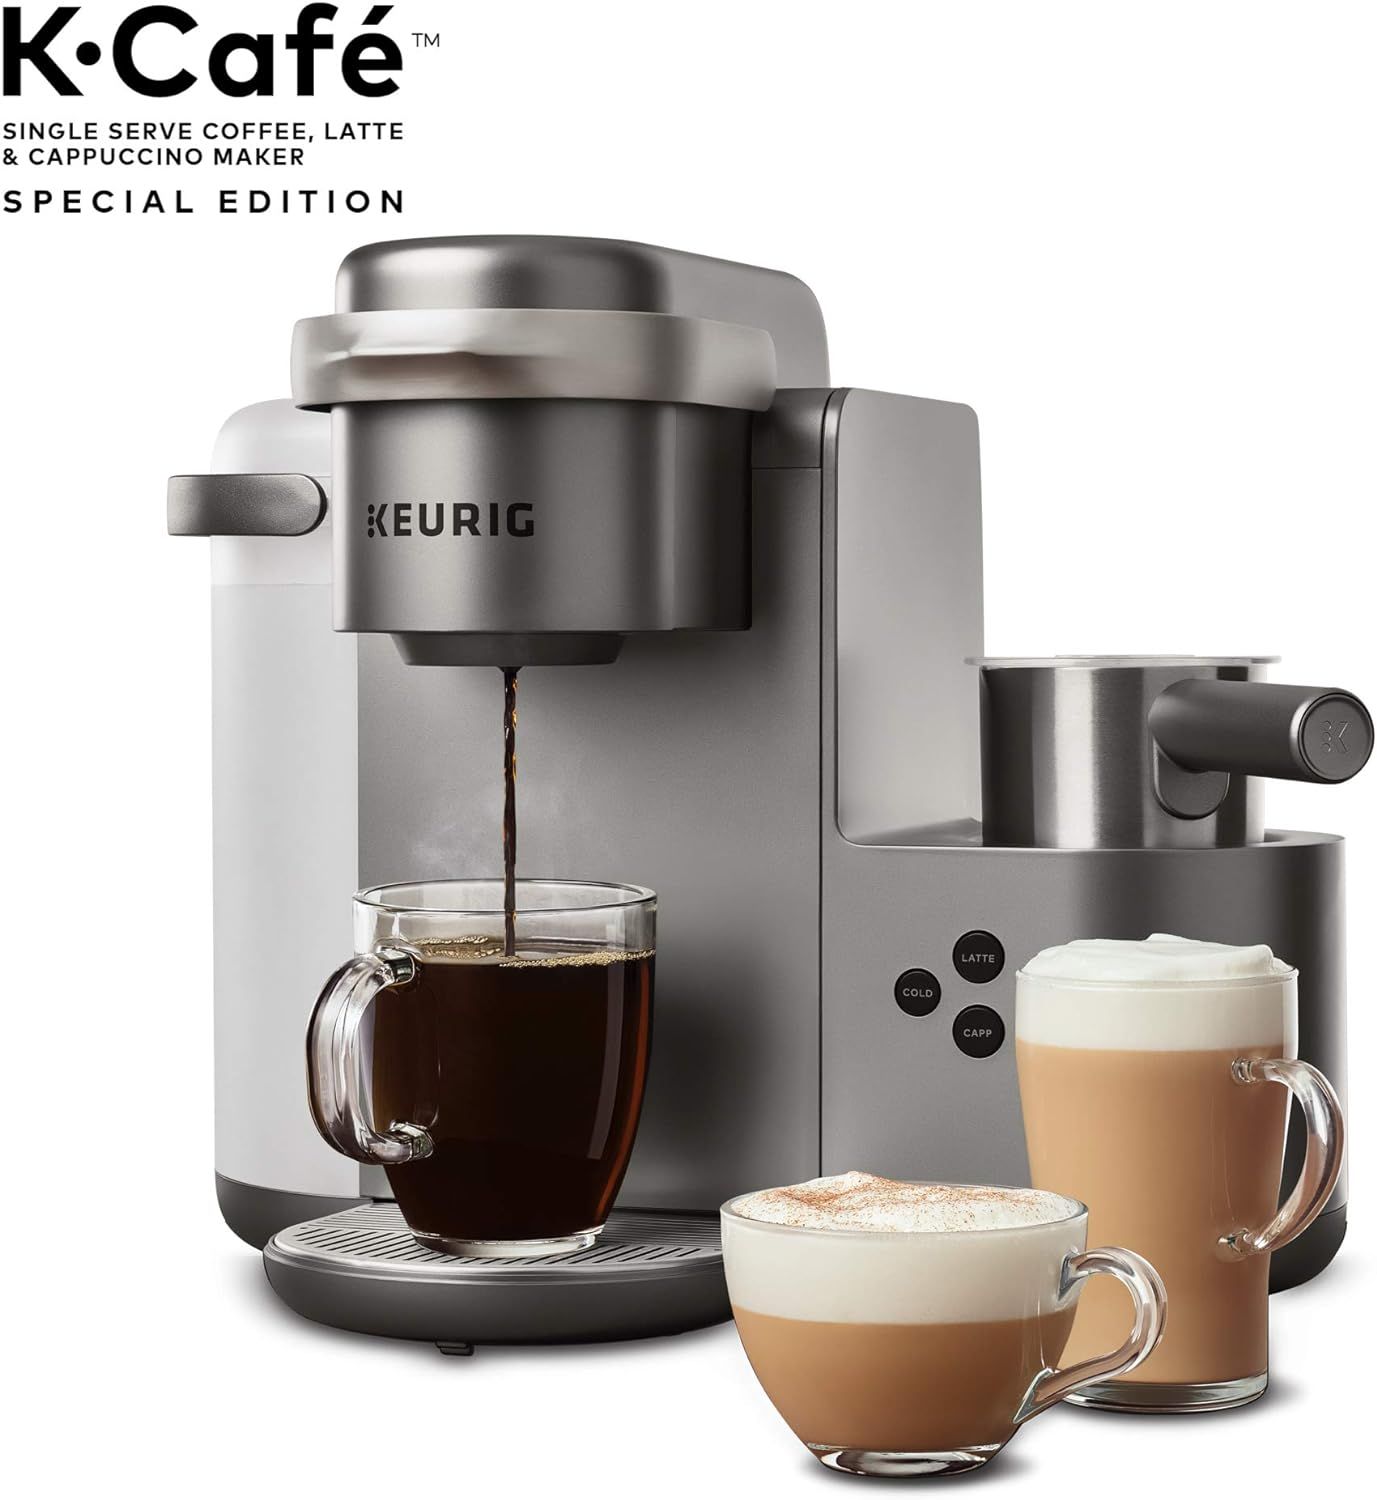 Keurig K-Cafe Coffee Maker, Single Serve K-Cup Pod Coffee, Latte and Cappuccino Maker, Comes with... | Amazon (US)